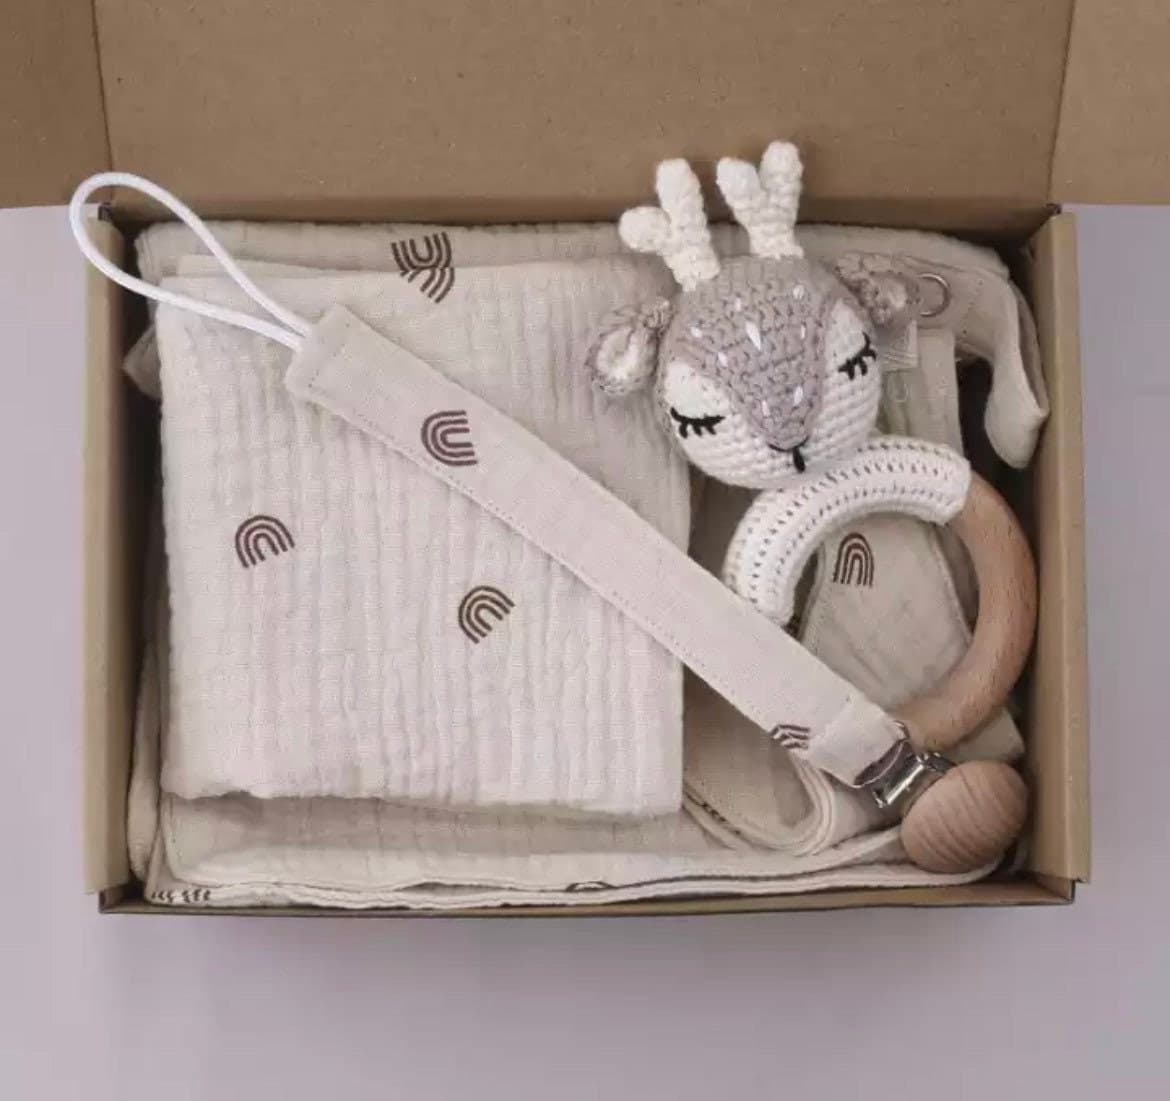 Unisex Baby Muslin Gift Set | Baby Muslin Cotton Bib  | Baby Shower Pr-
 This is a gorgeous muslin cotton gift set is a perfect set of items carefully made and packed for a newborn!Product Info -This lovely muslin set includes:- A rever-Bijou Bubs